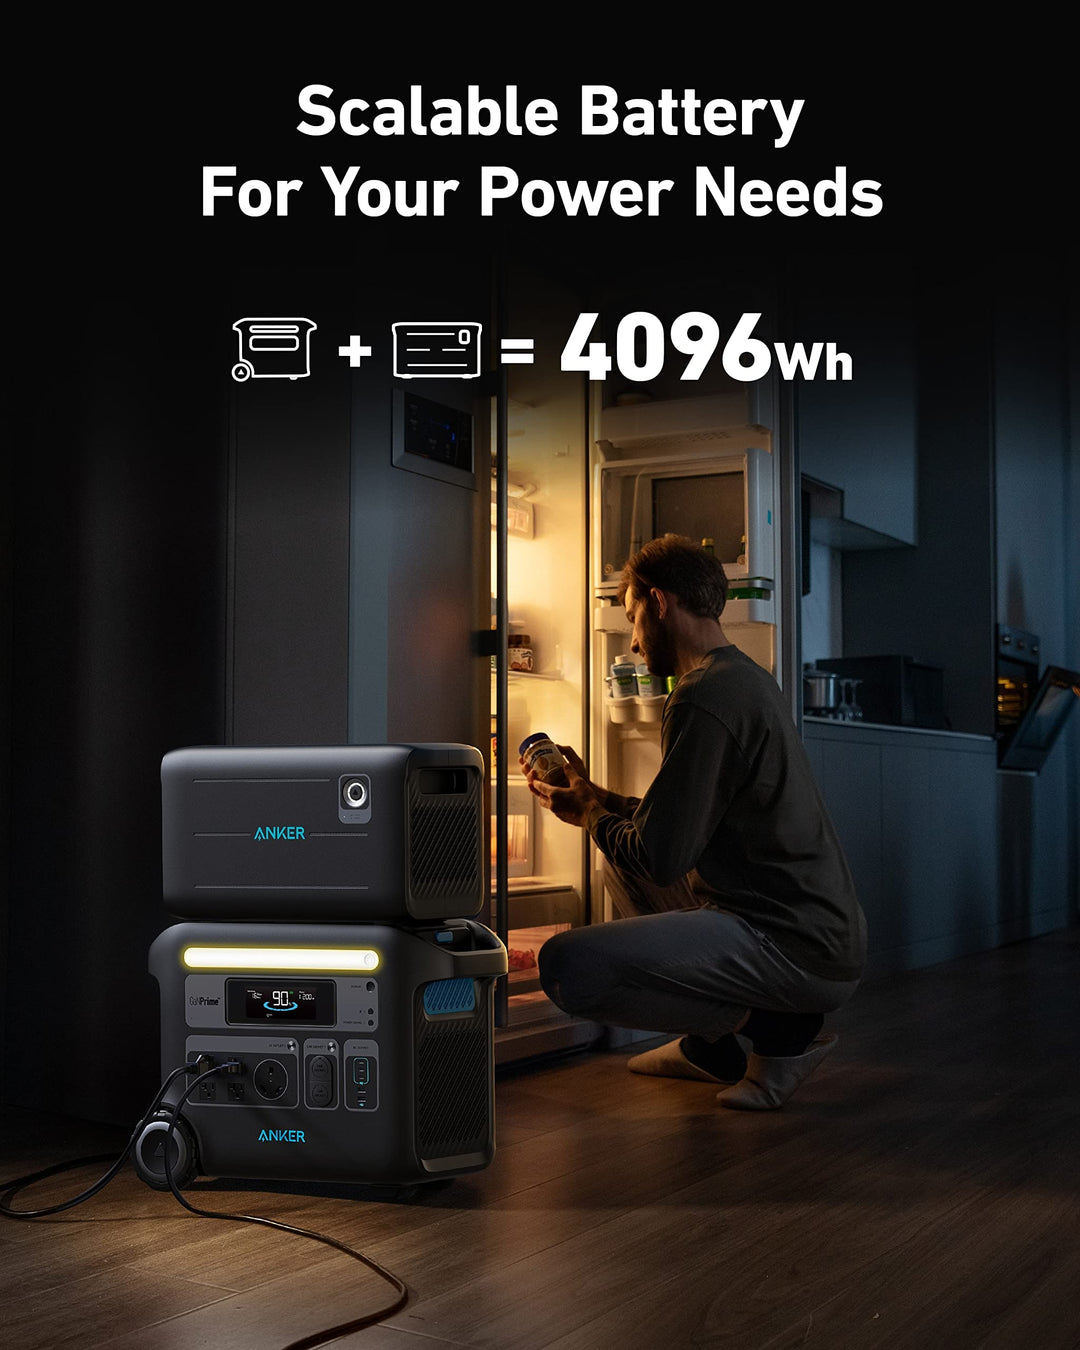 Anker 2400W Portable Solar Generator Power Station with 2048wh LiFePO4 Battery - For Home, Camping, RVs